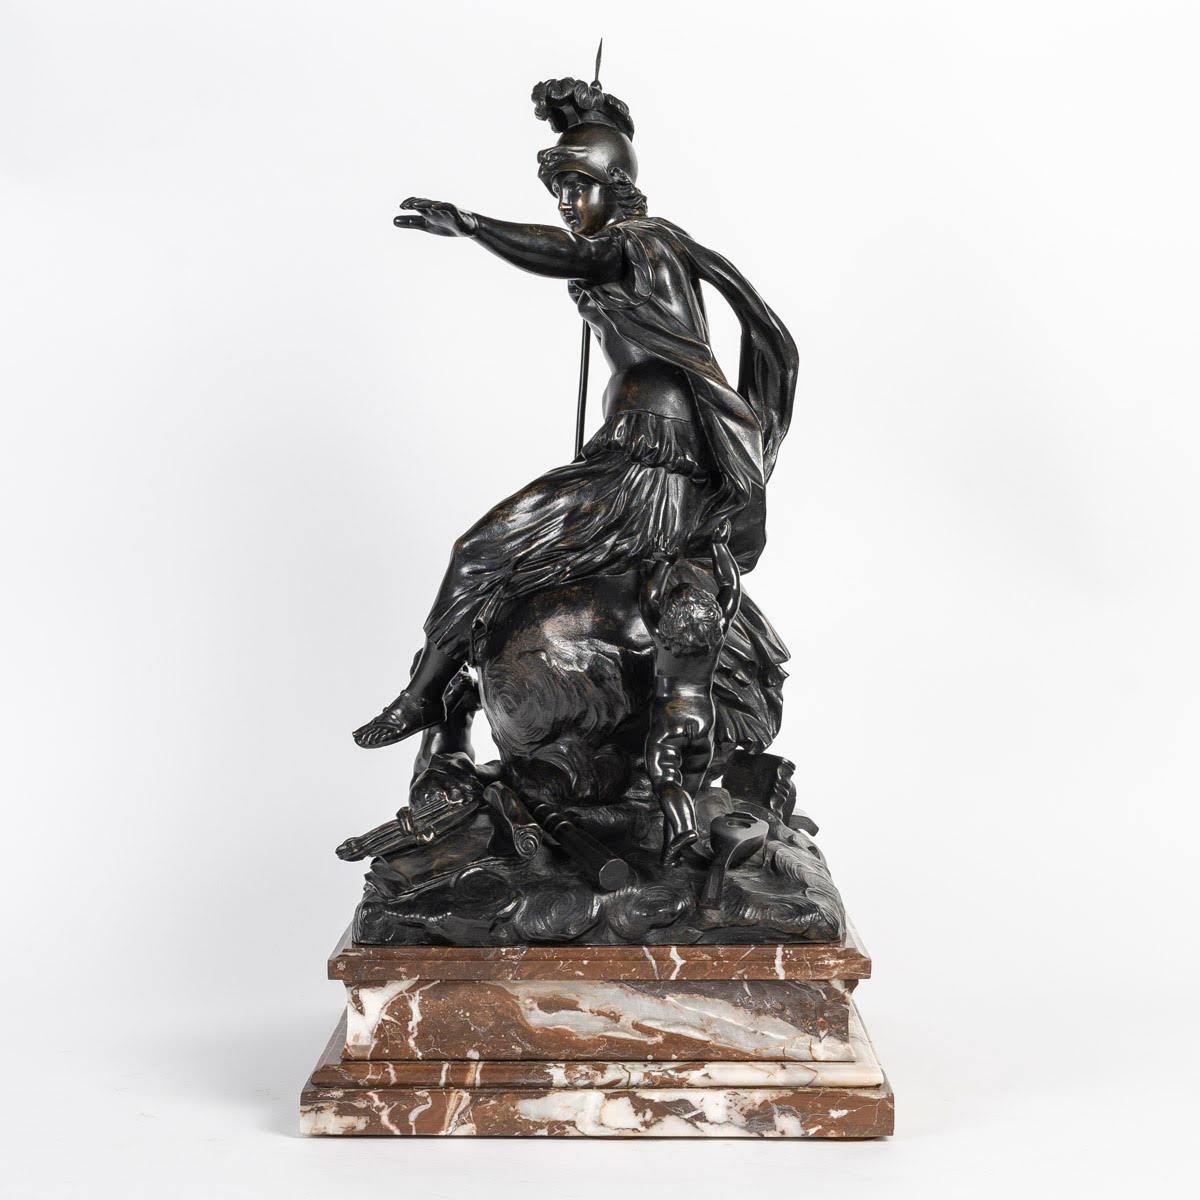 Bronze Sculpture of a Helmeted Woman Surrounded by Cherubs, Napoleon III Period. For Sale 3